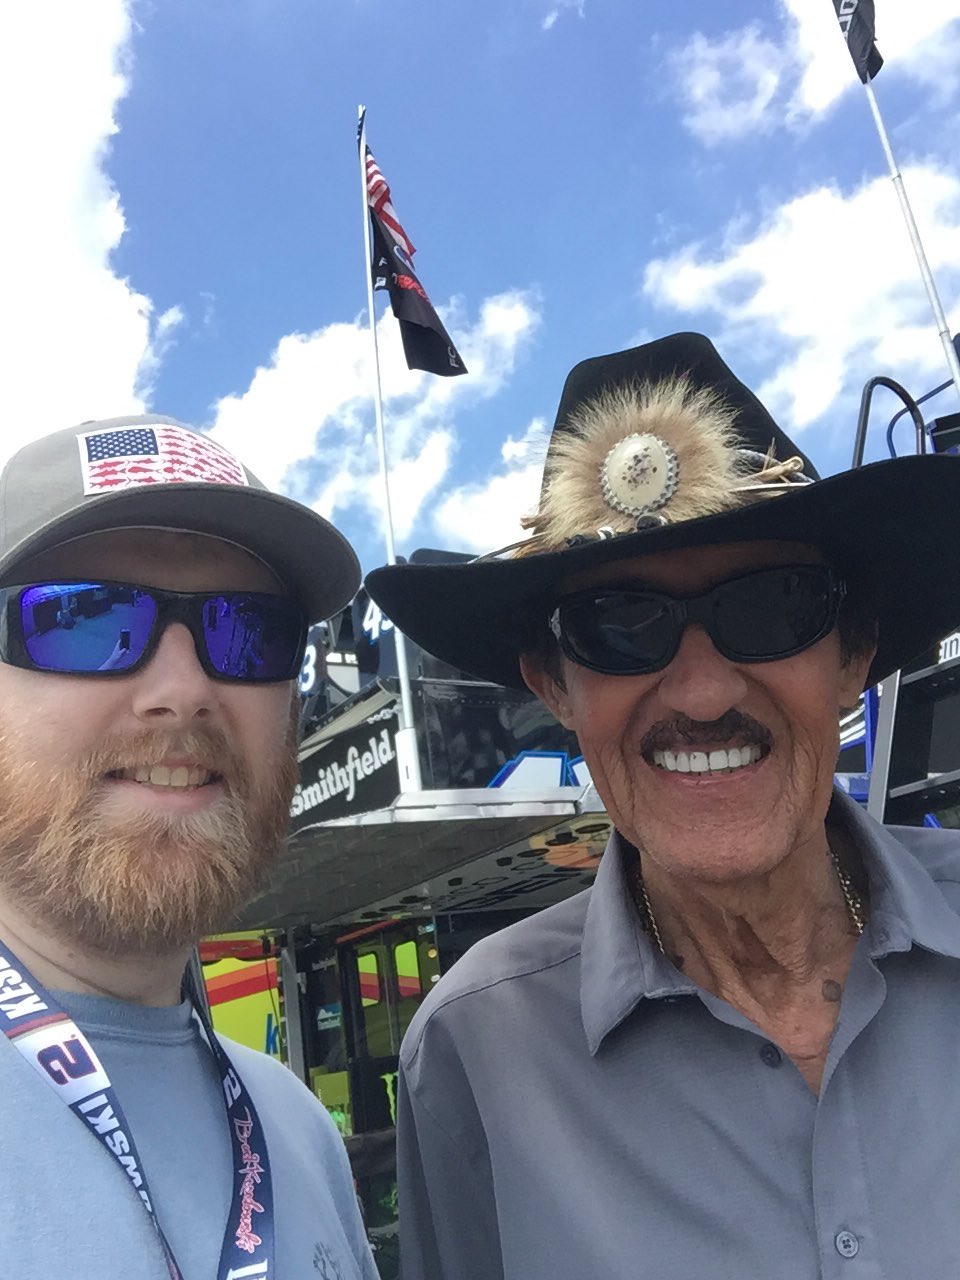 Happy 80th birthday to The King Richard Petty. Had a chance to meet him back at 